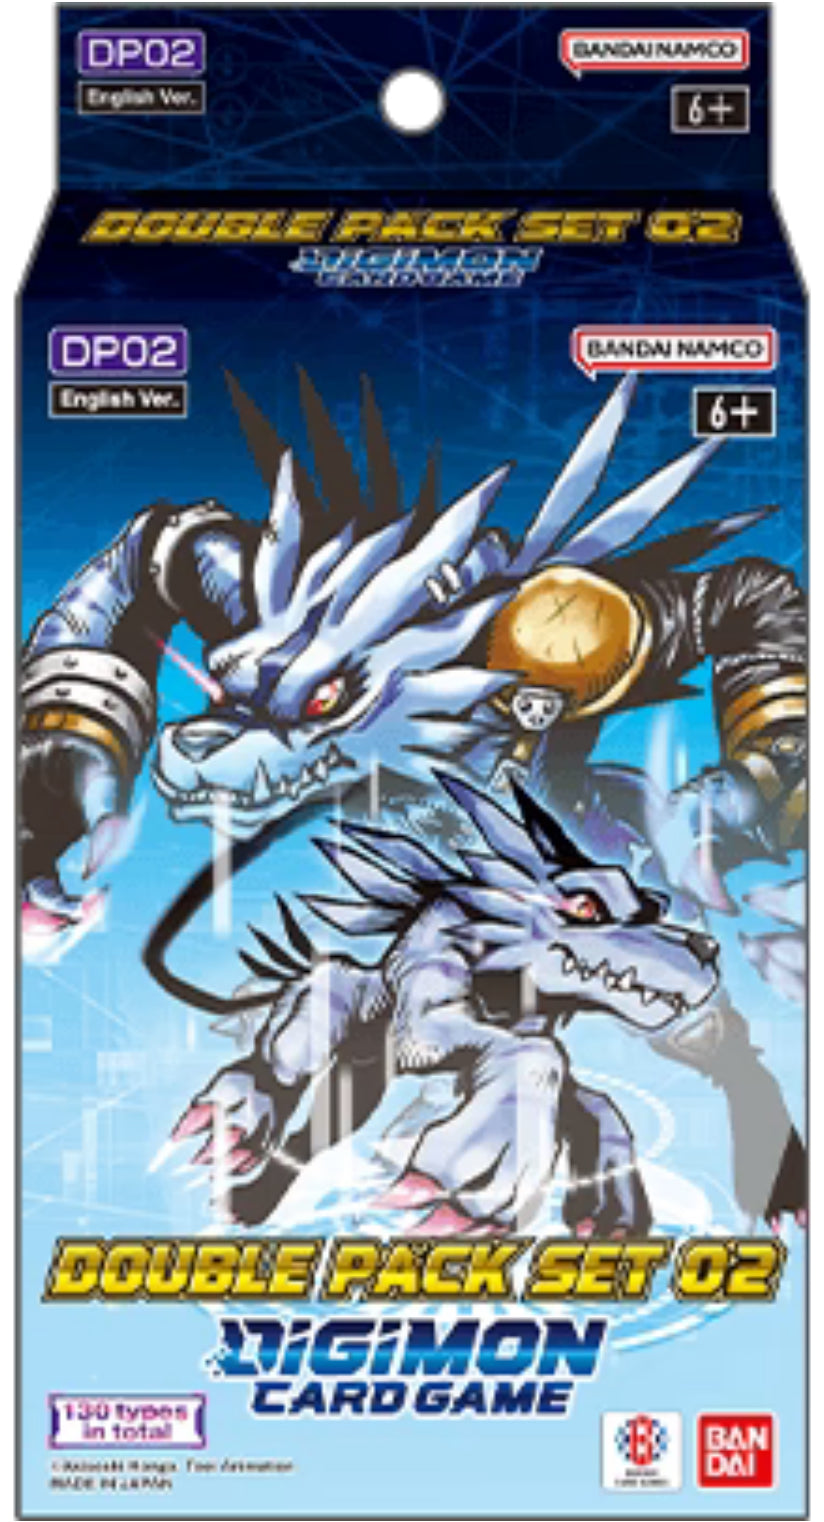 Digimon Card Game - Double Pack Set Volume 2